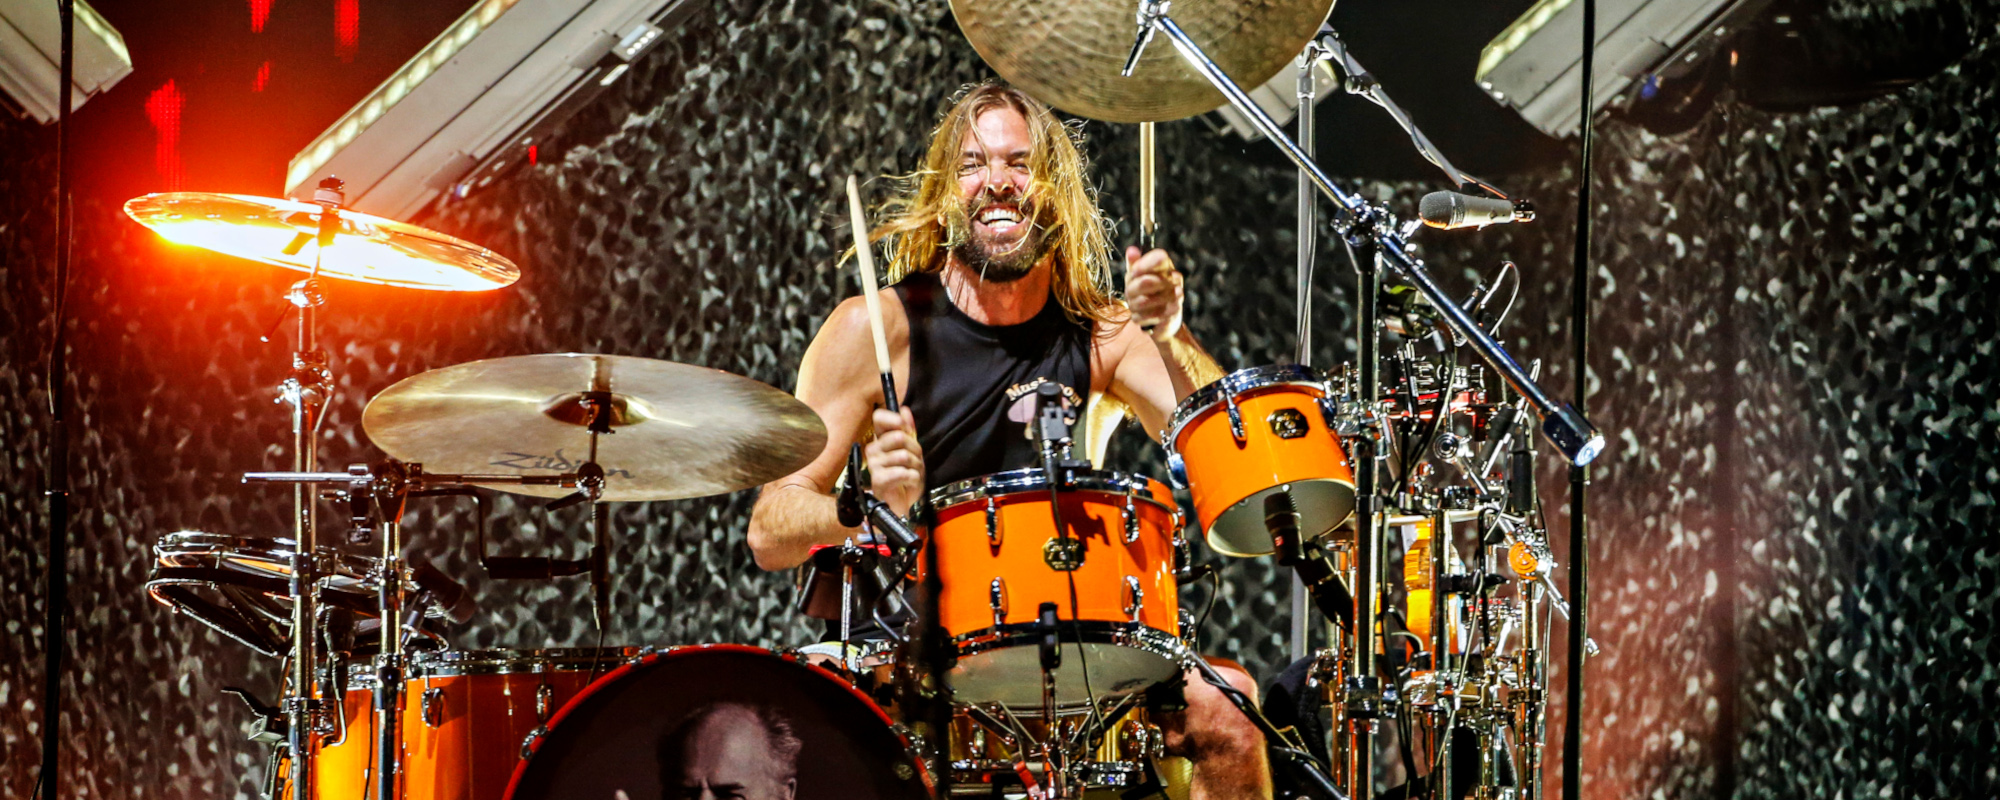 Taylor Hawkins Preliminary Toxicology Report Released